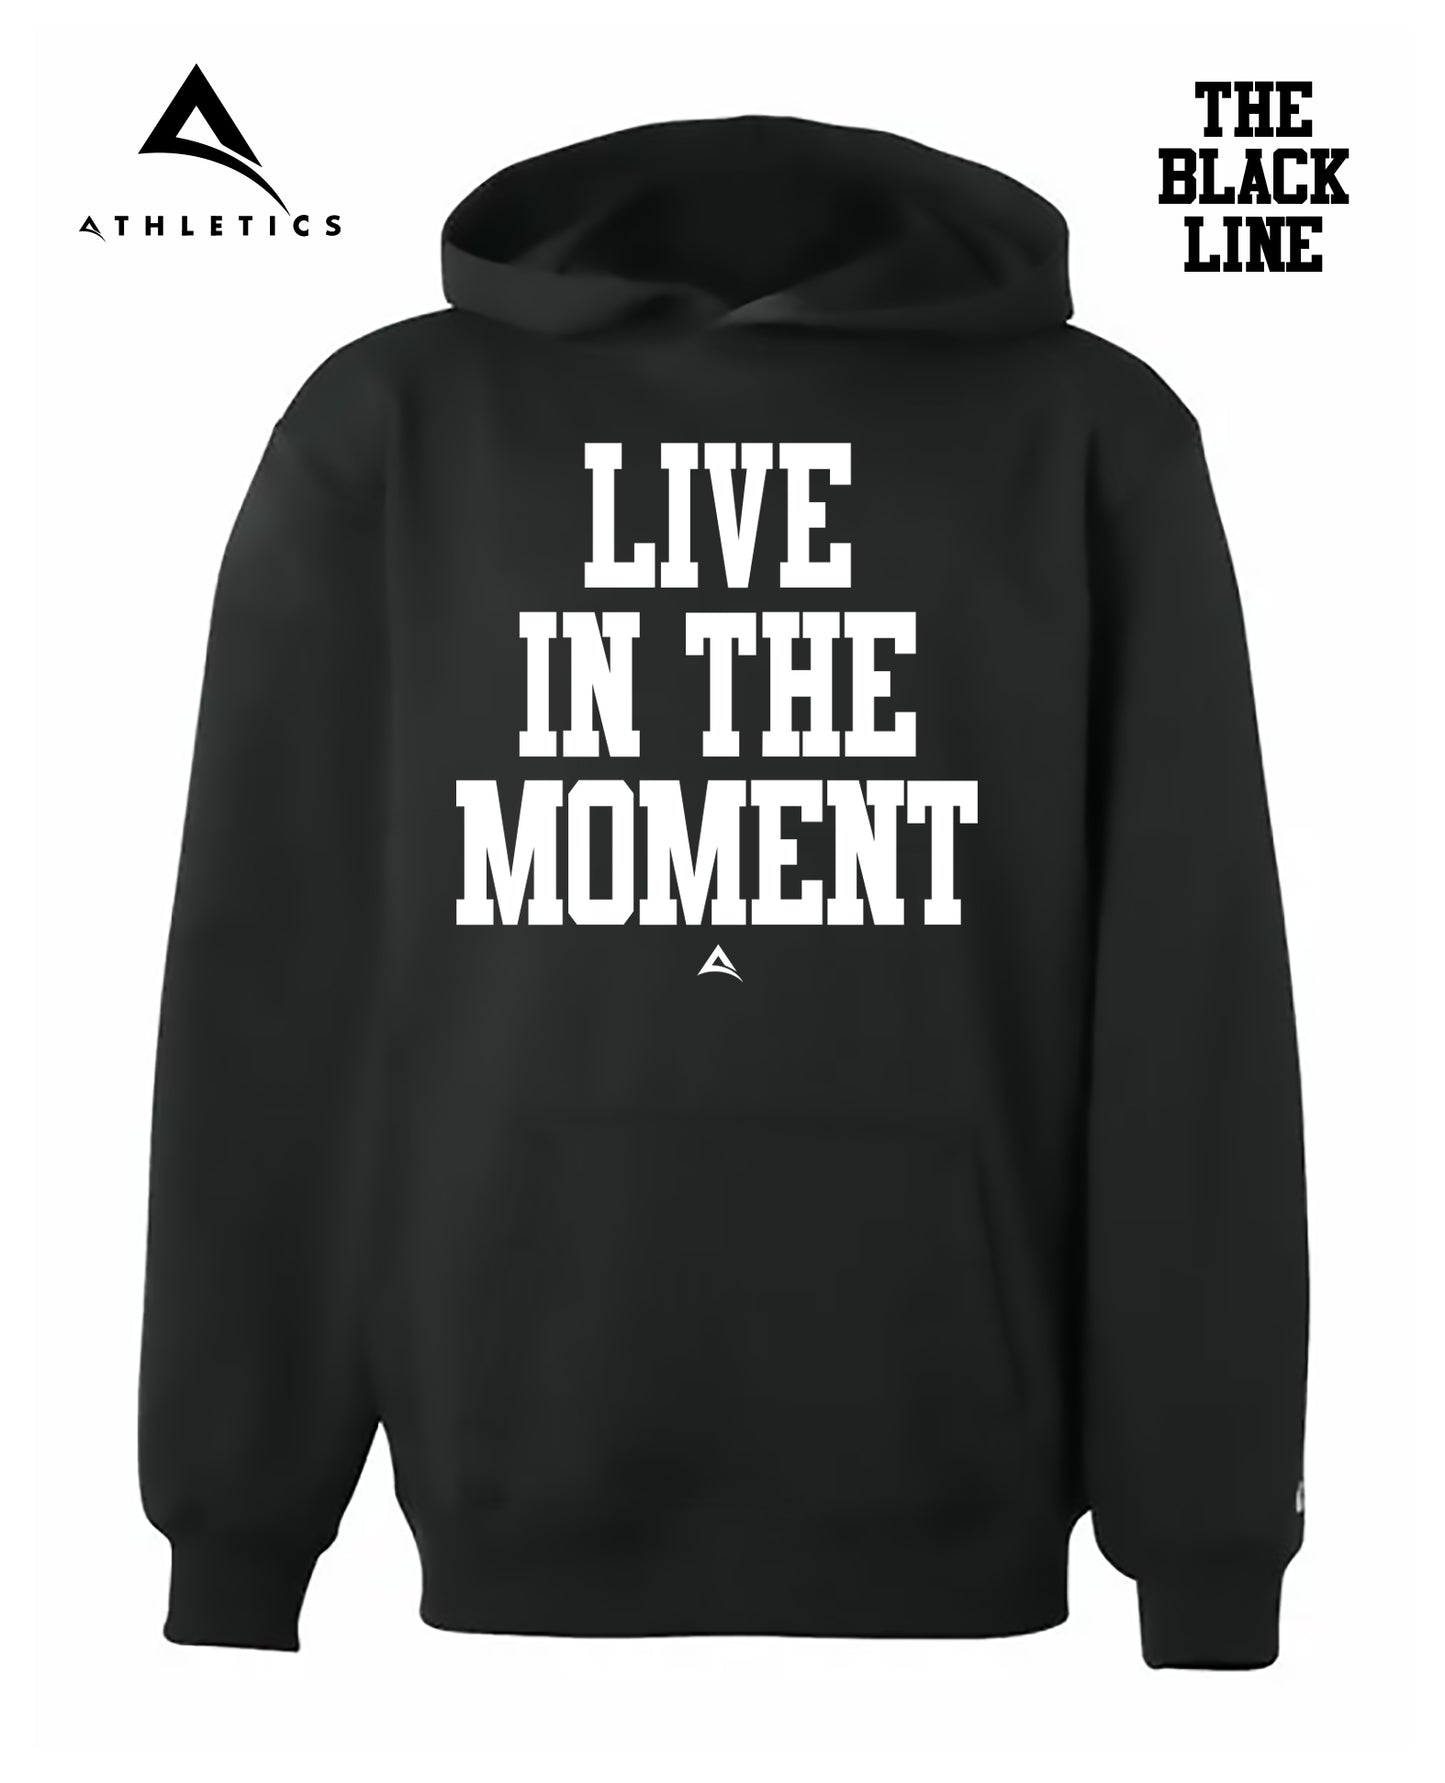 LIVE IN THE MOMENT